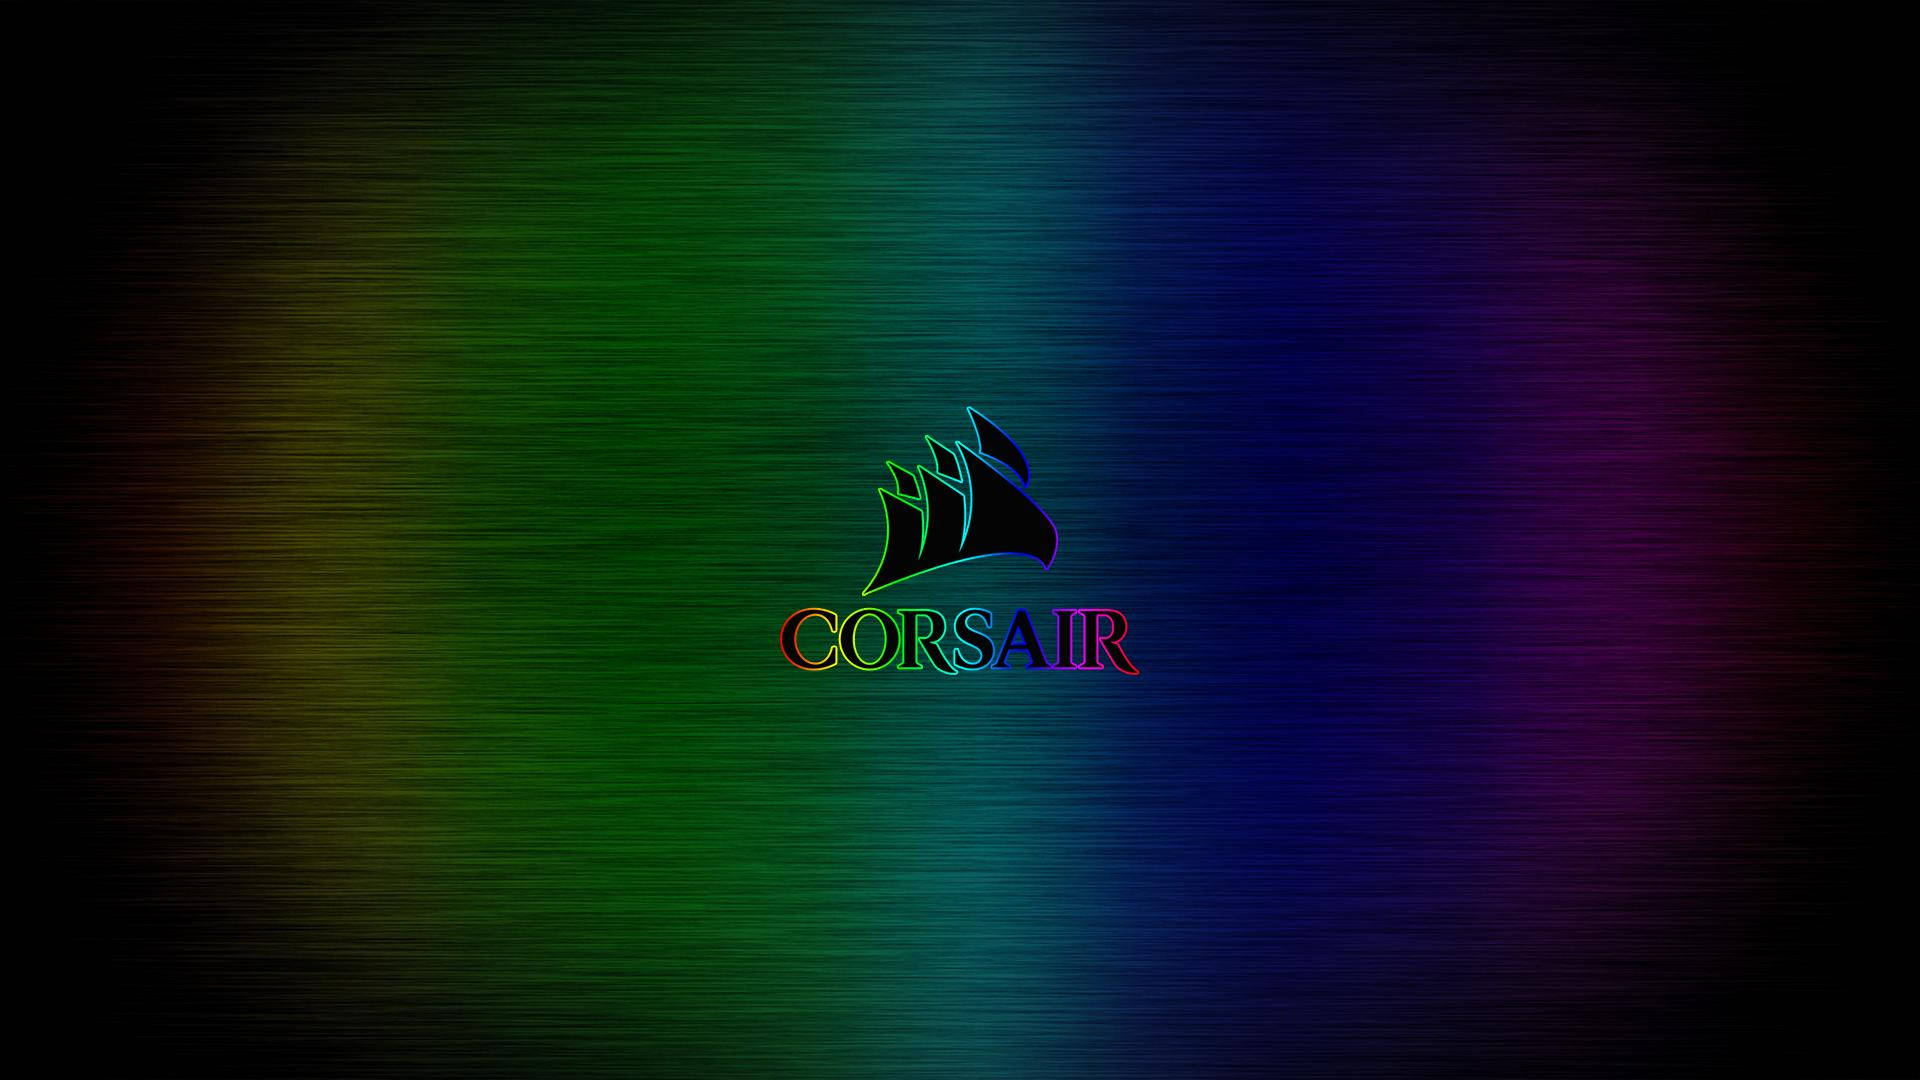 Experience the full power of your gaming setup with Corsair Wallpaper